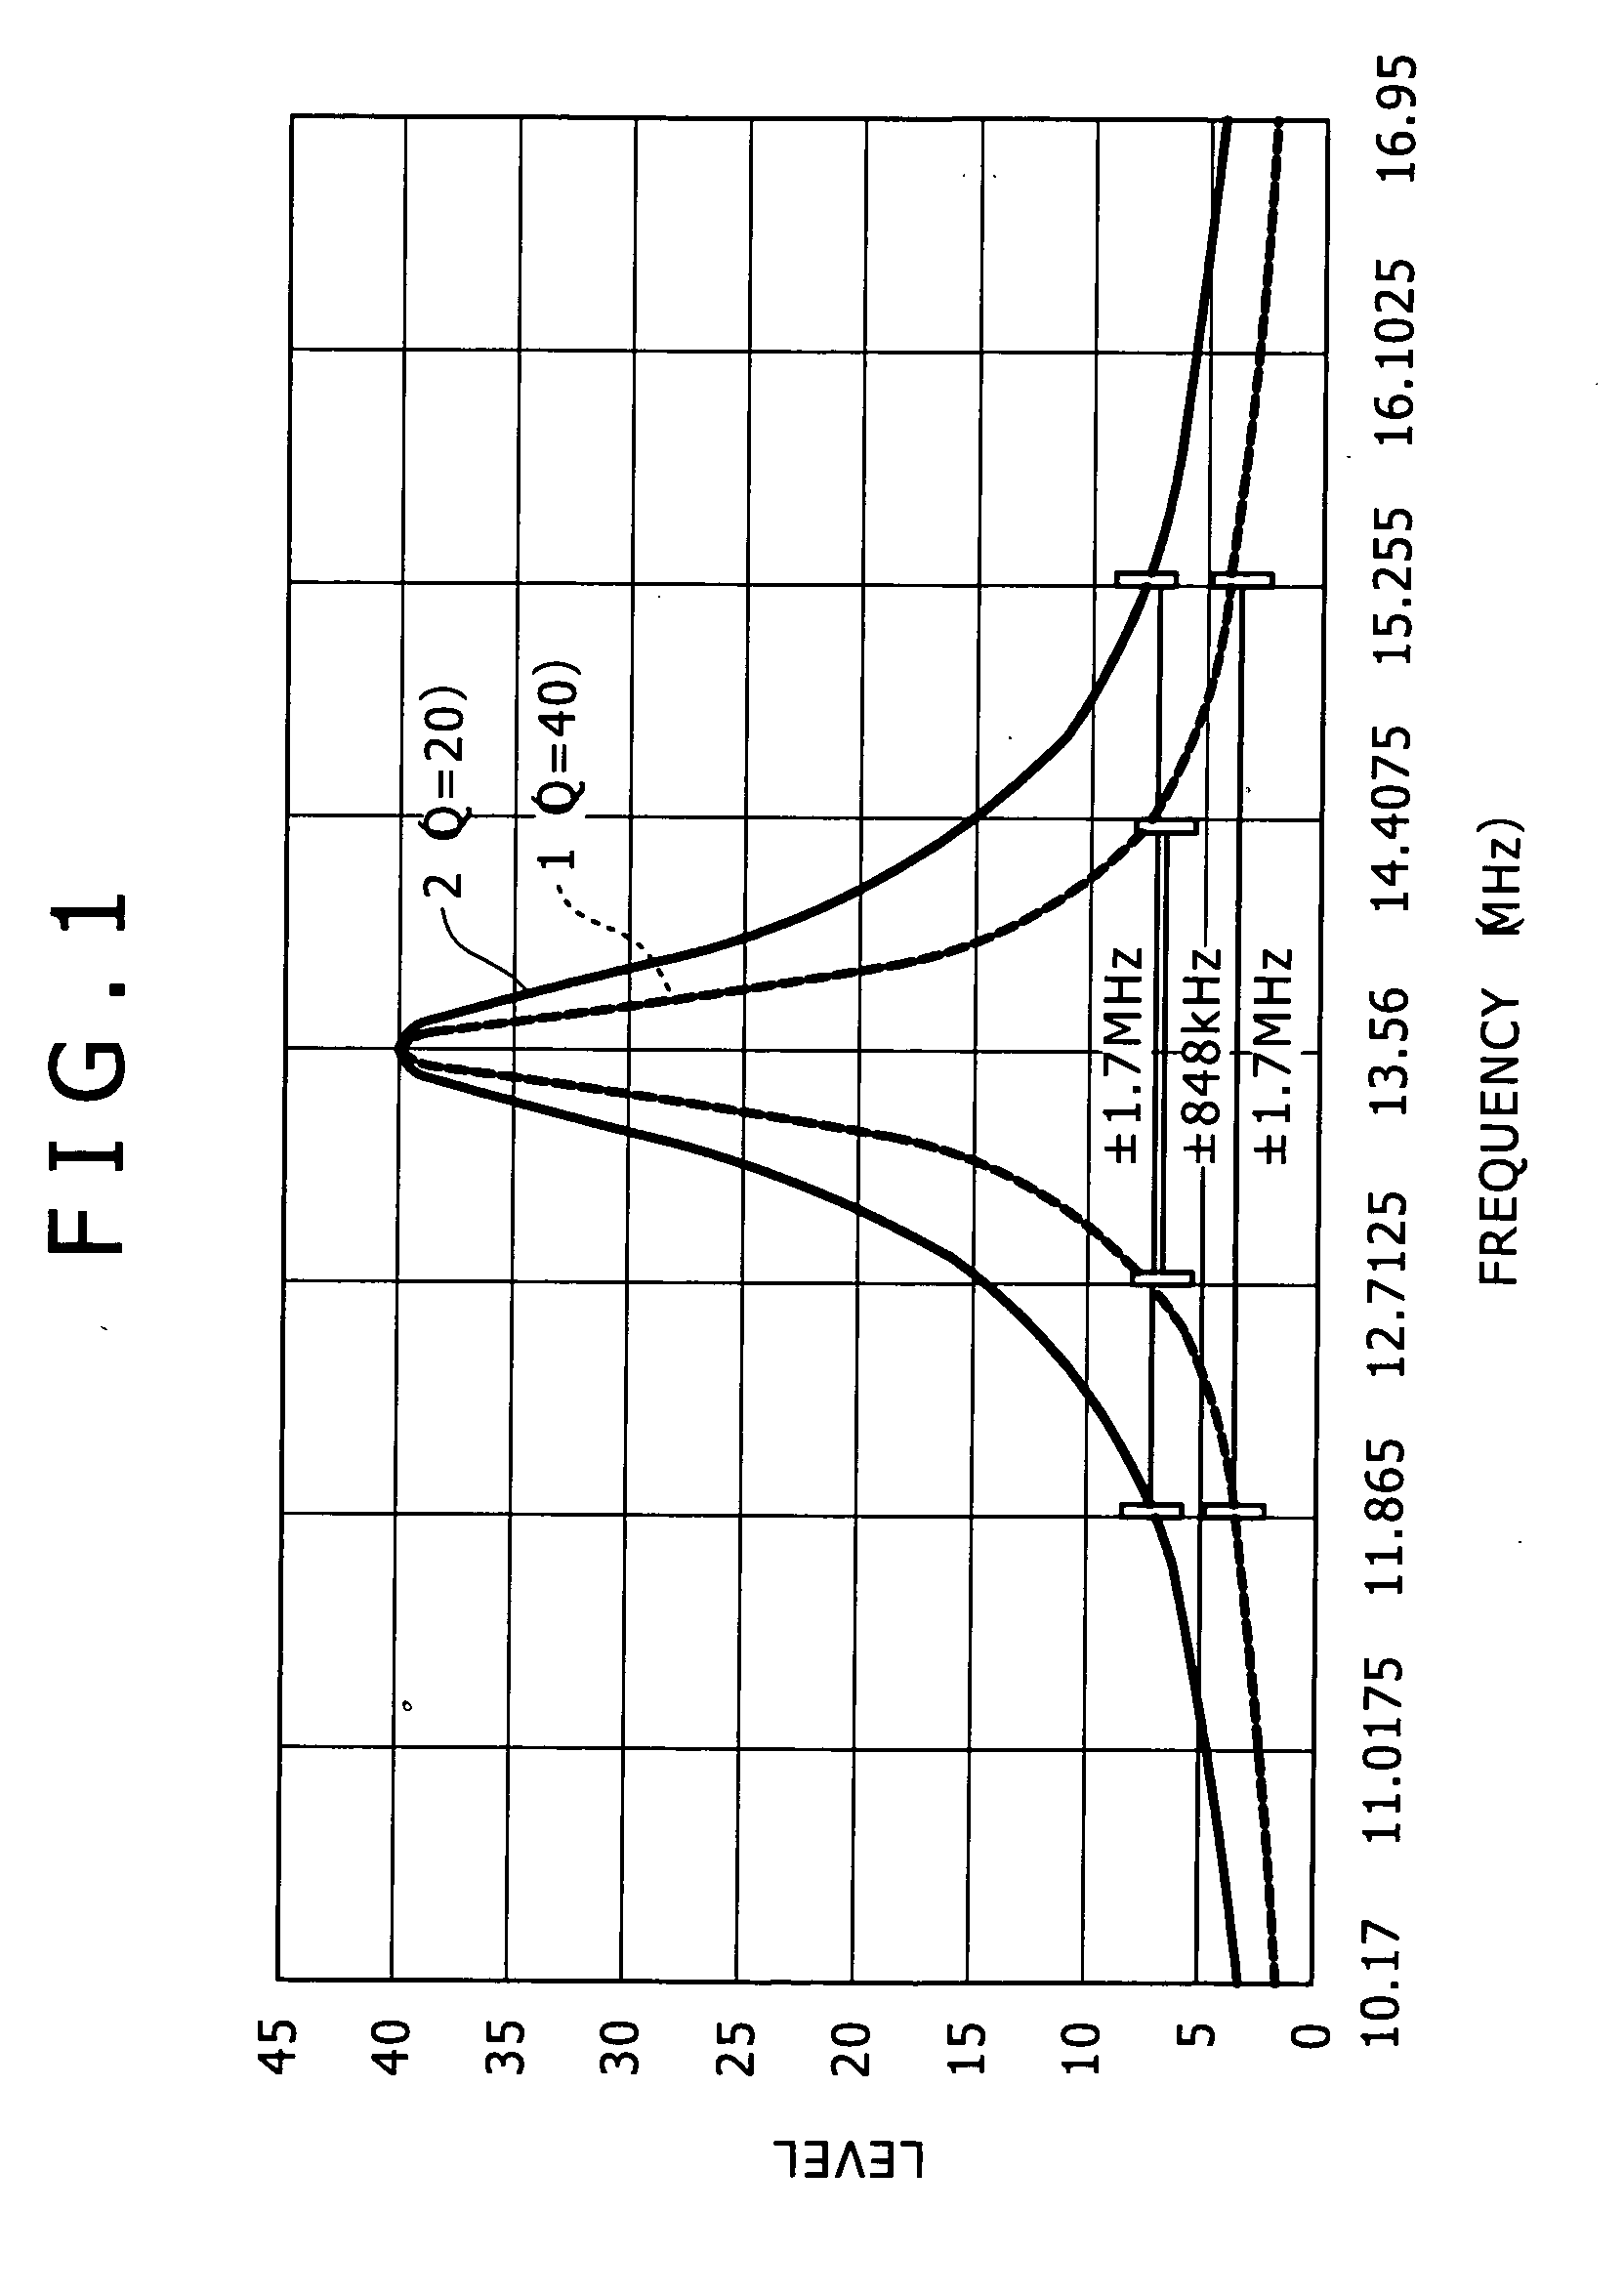 Noncontact communication apparatus and noncontact communication method